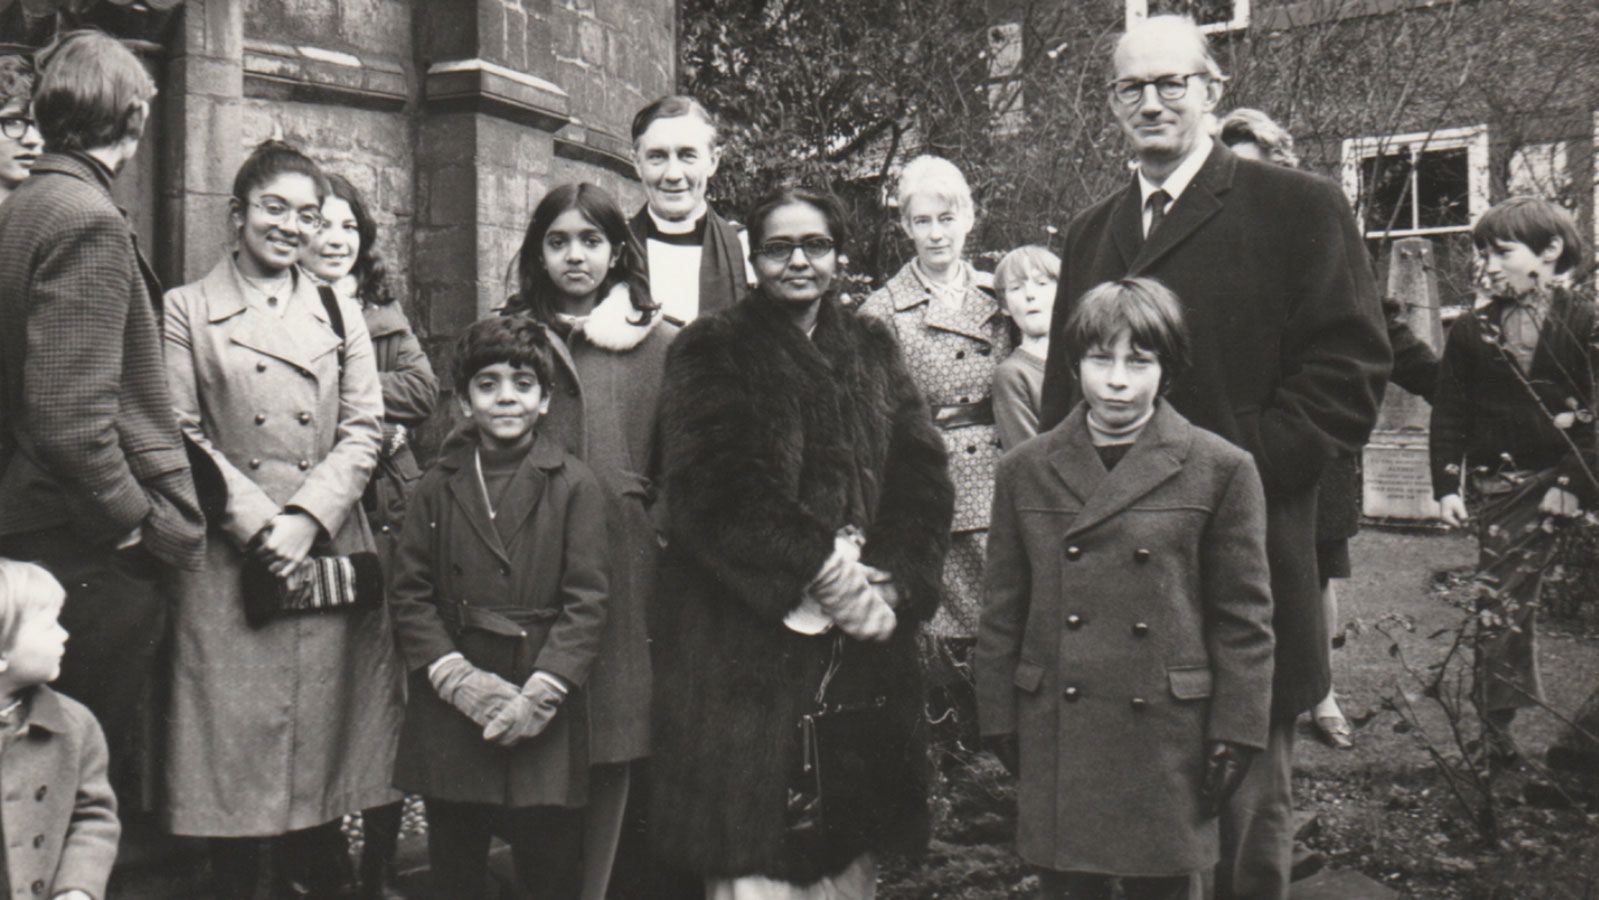 The writer's family outside a church in Cambridge, UK, after leaving Uganda in 1972. Lucy's grandmother Rachel, center, wears a donated fur coat. 